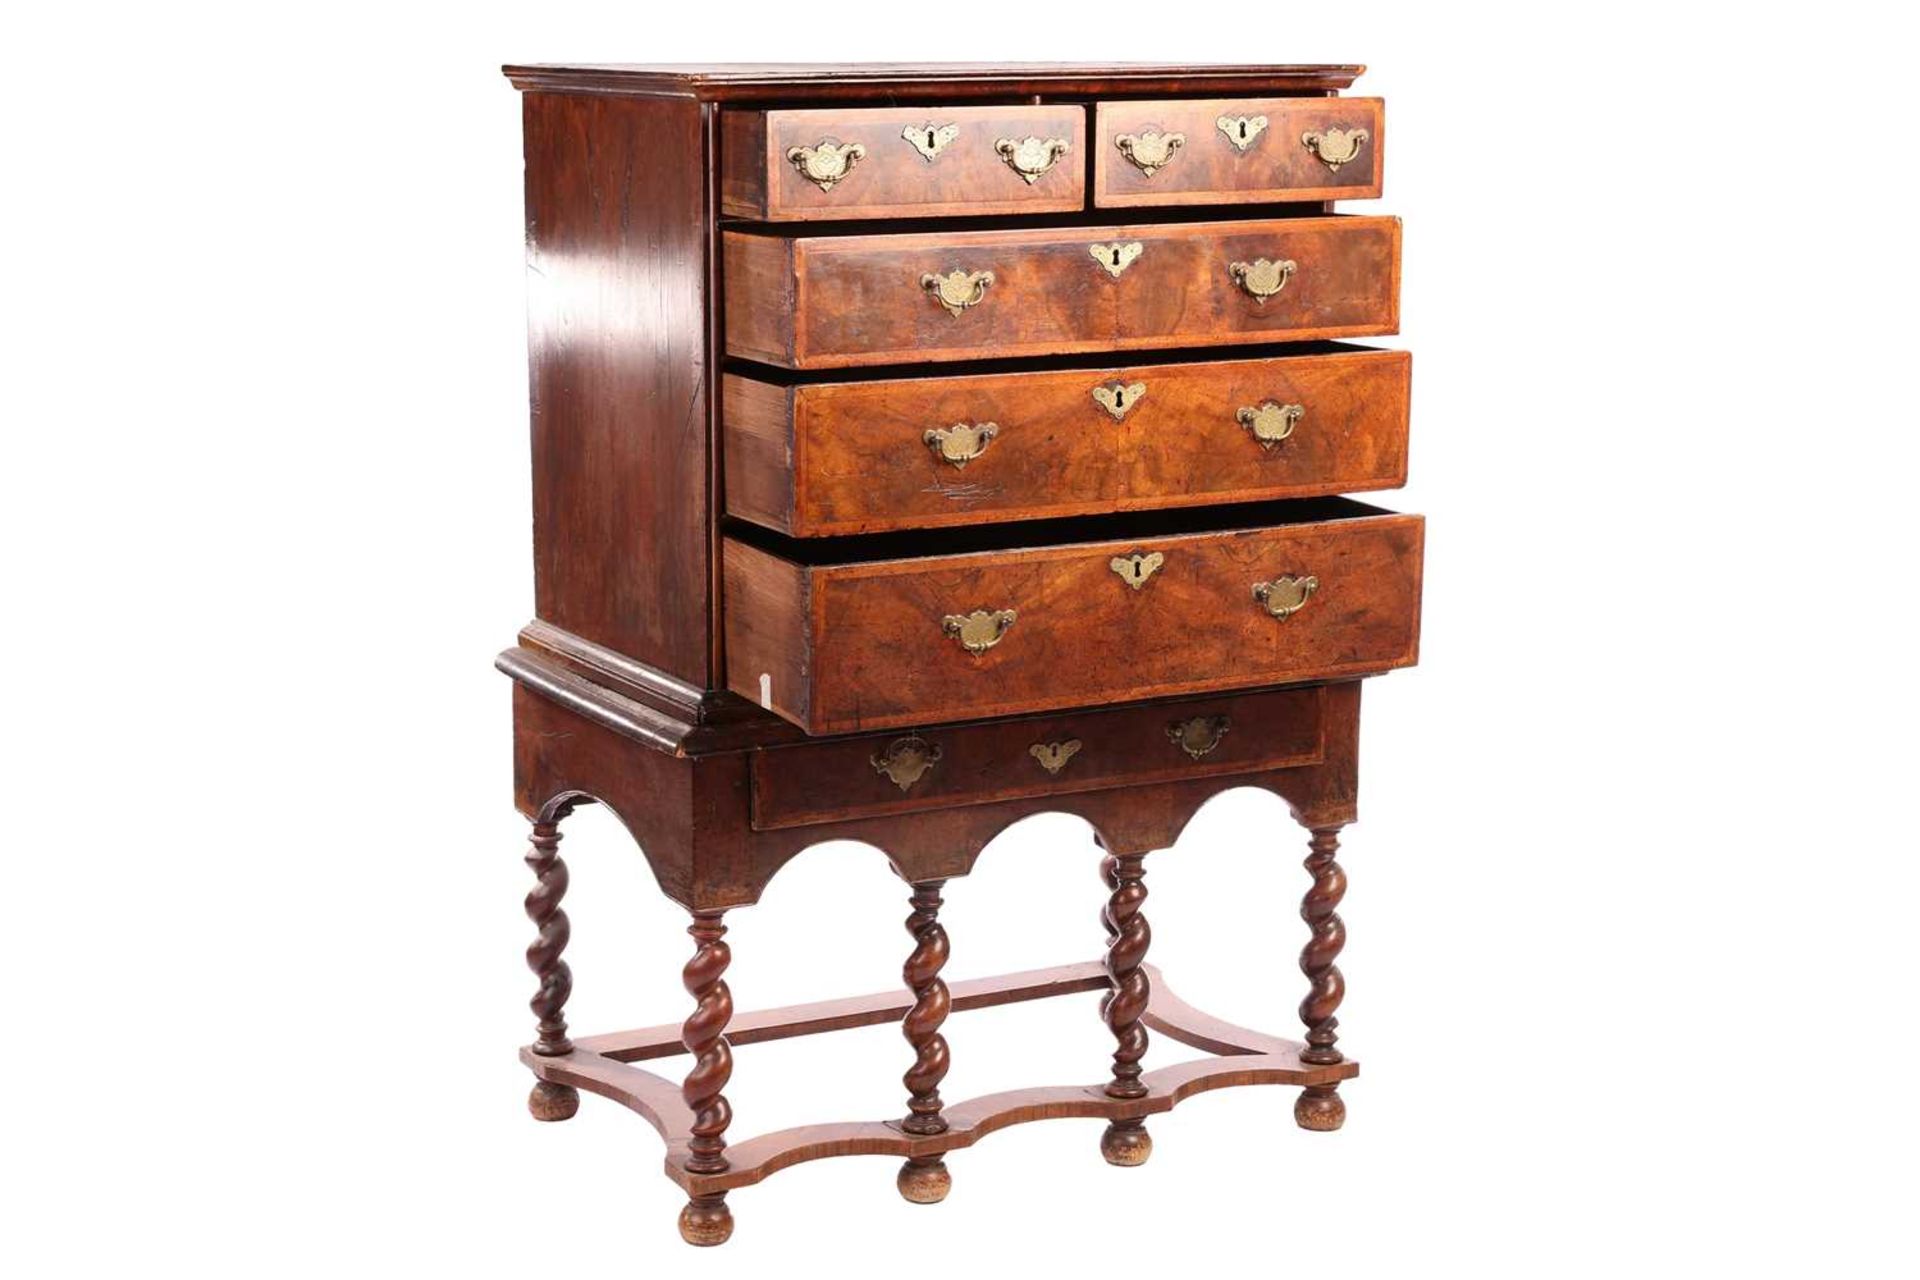 A 17th-century and later figured walnut chest on stand, the upper section with quarter veneered top  - Image 5 of 7